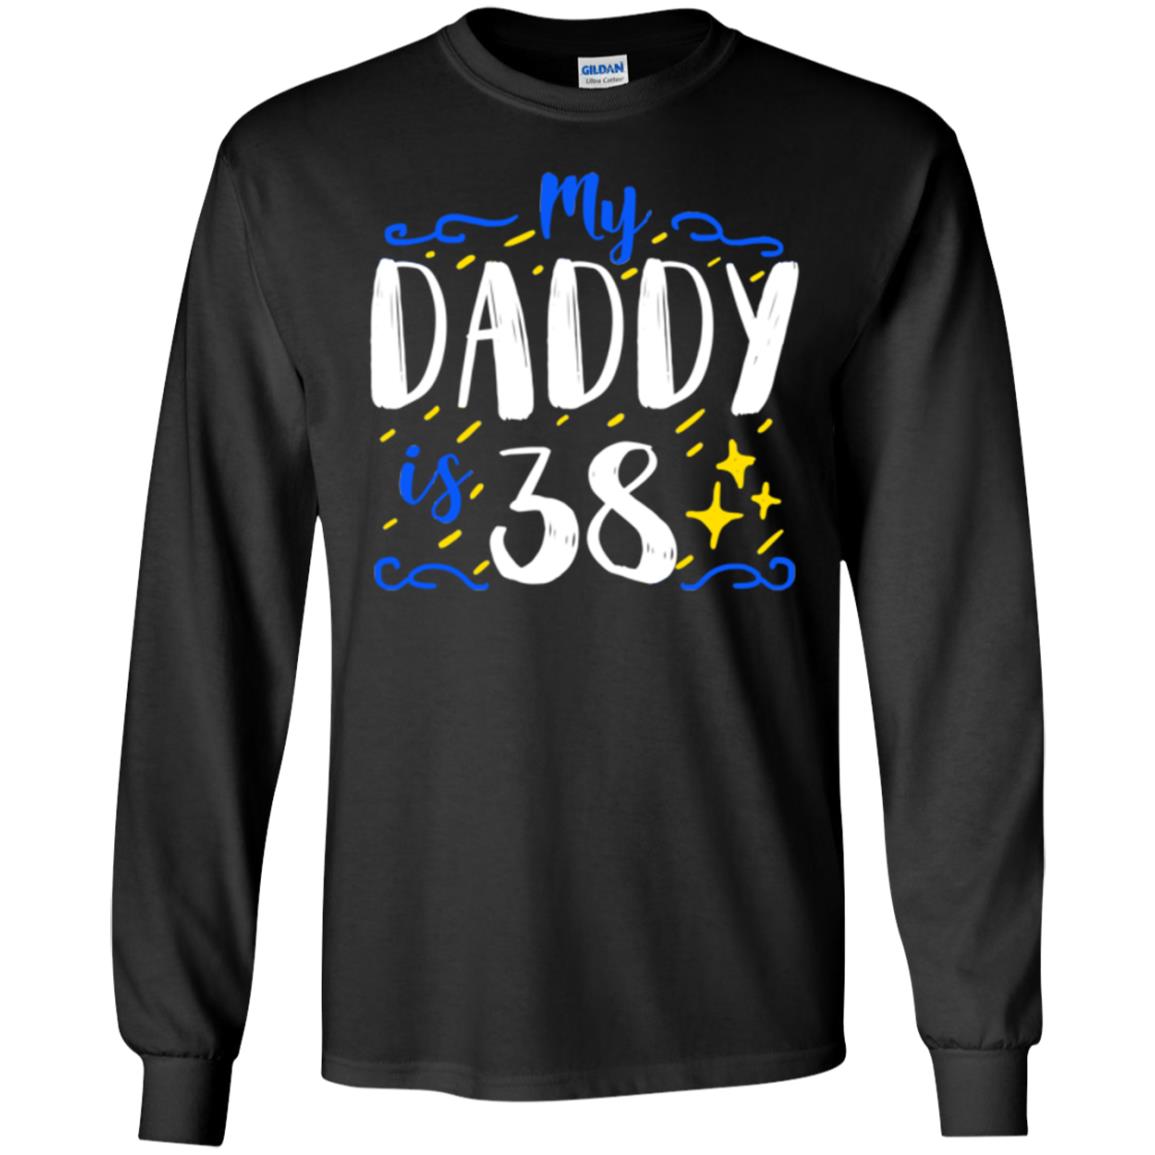 My Daddy Is 38 38th Birthday Daddy Shirt For Sons Or DaughtersG240 Gildan LS Ultra Cotton T-Shirt